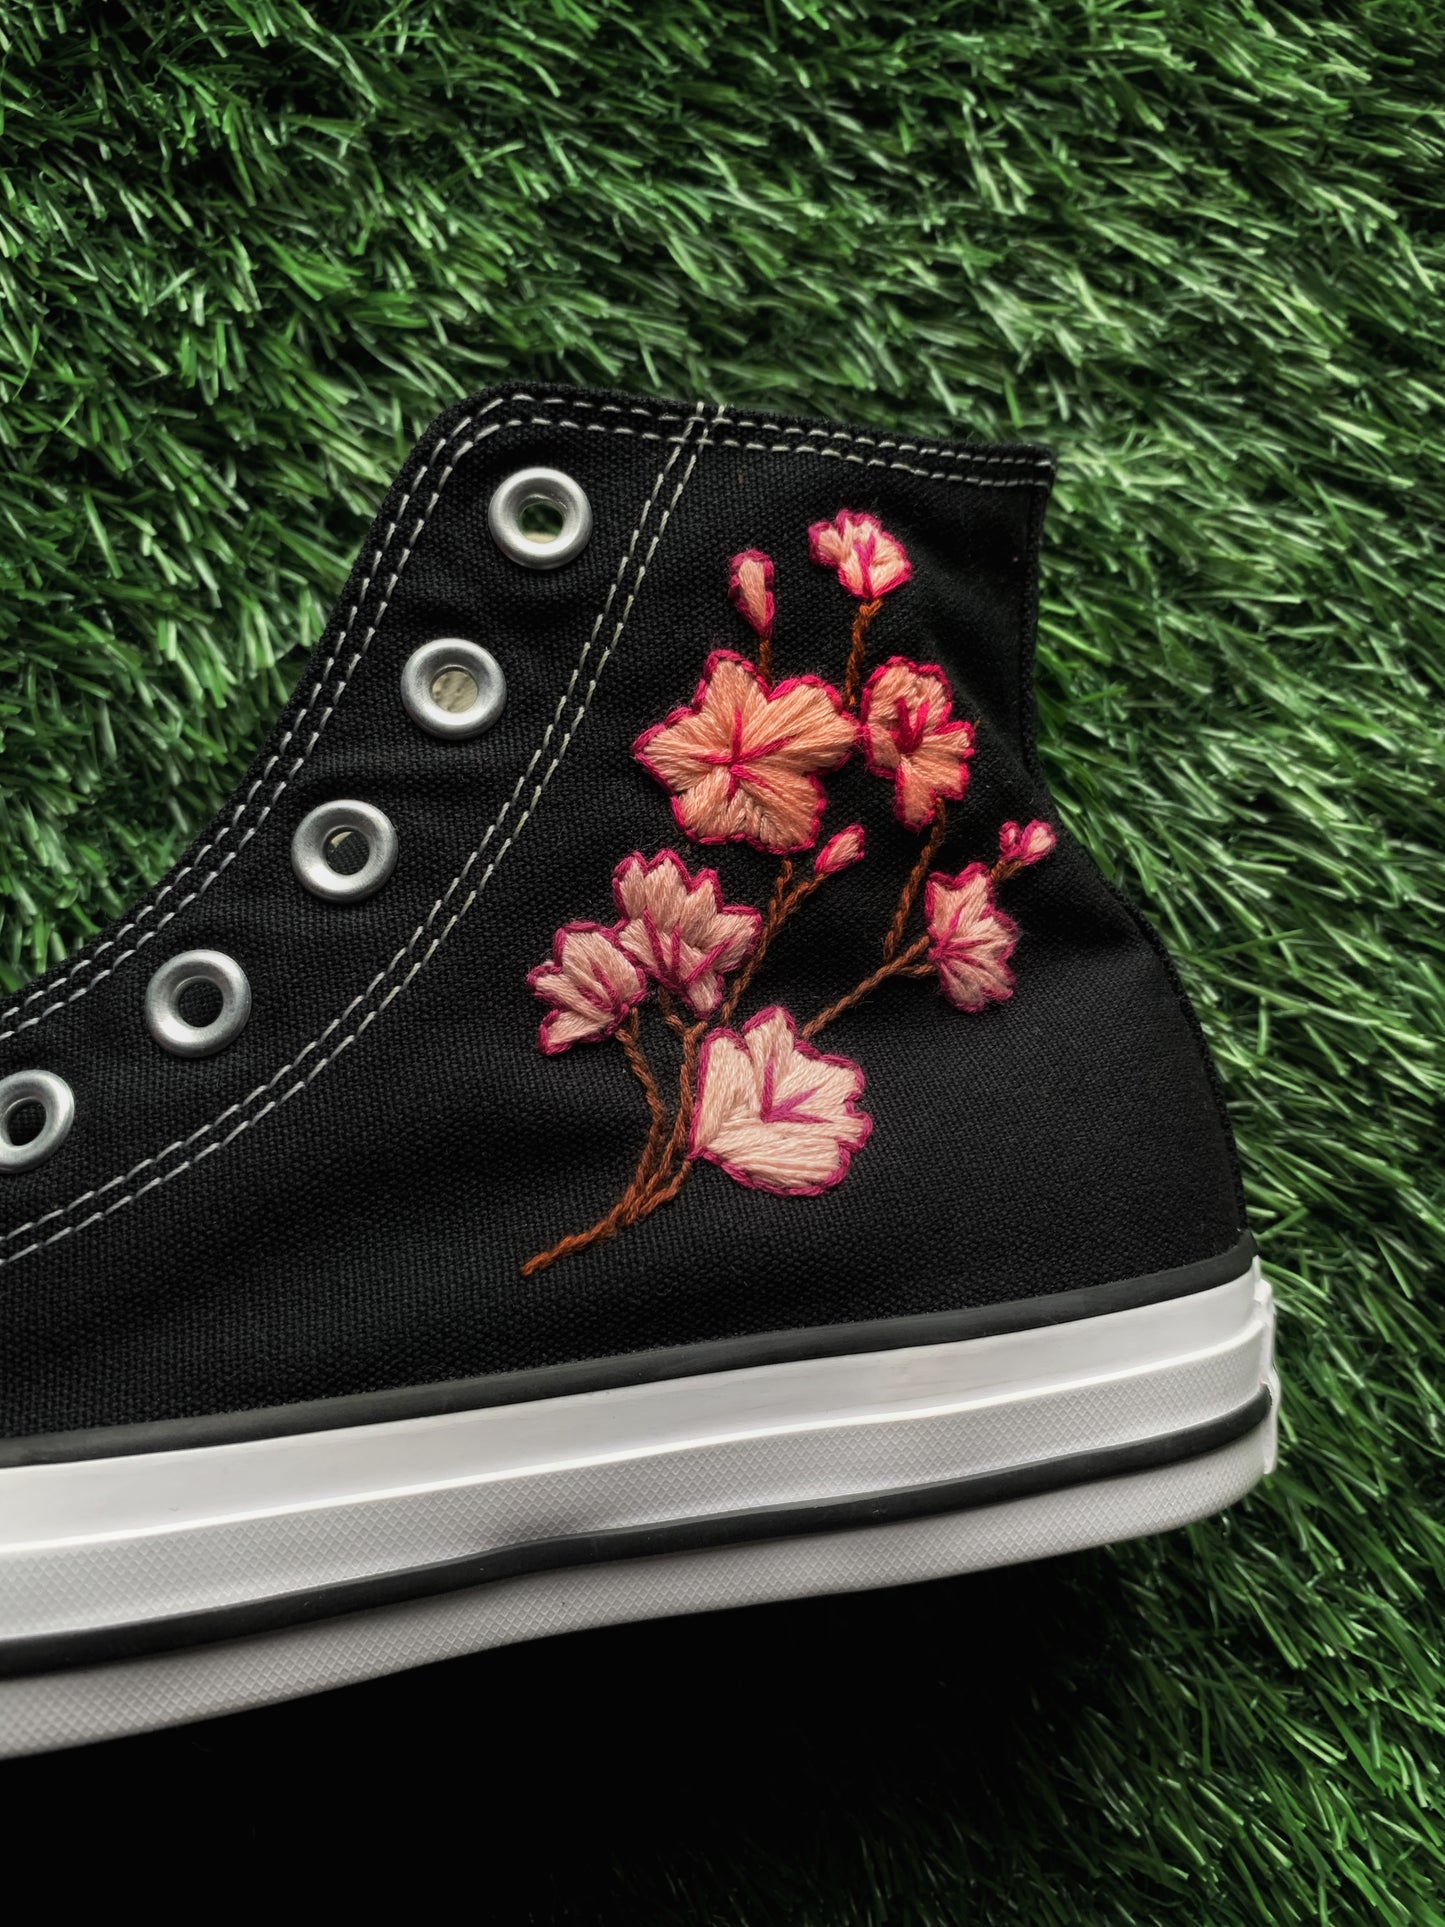 Converse x Cherry Blossom Embroidery